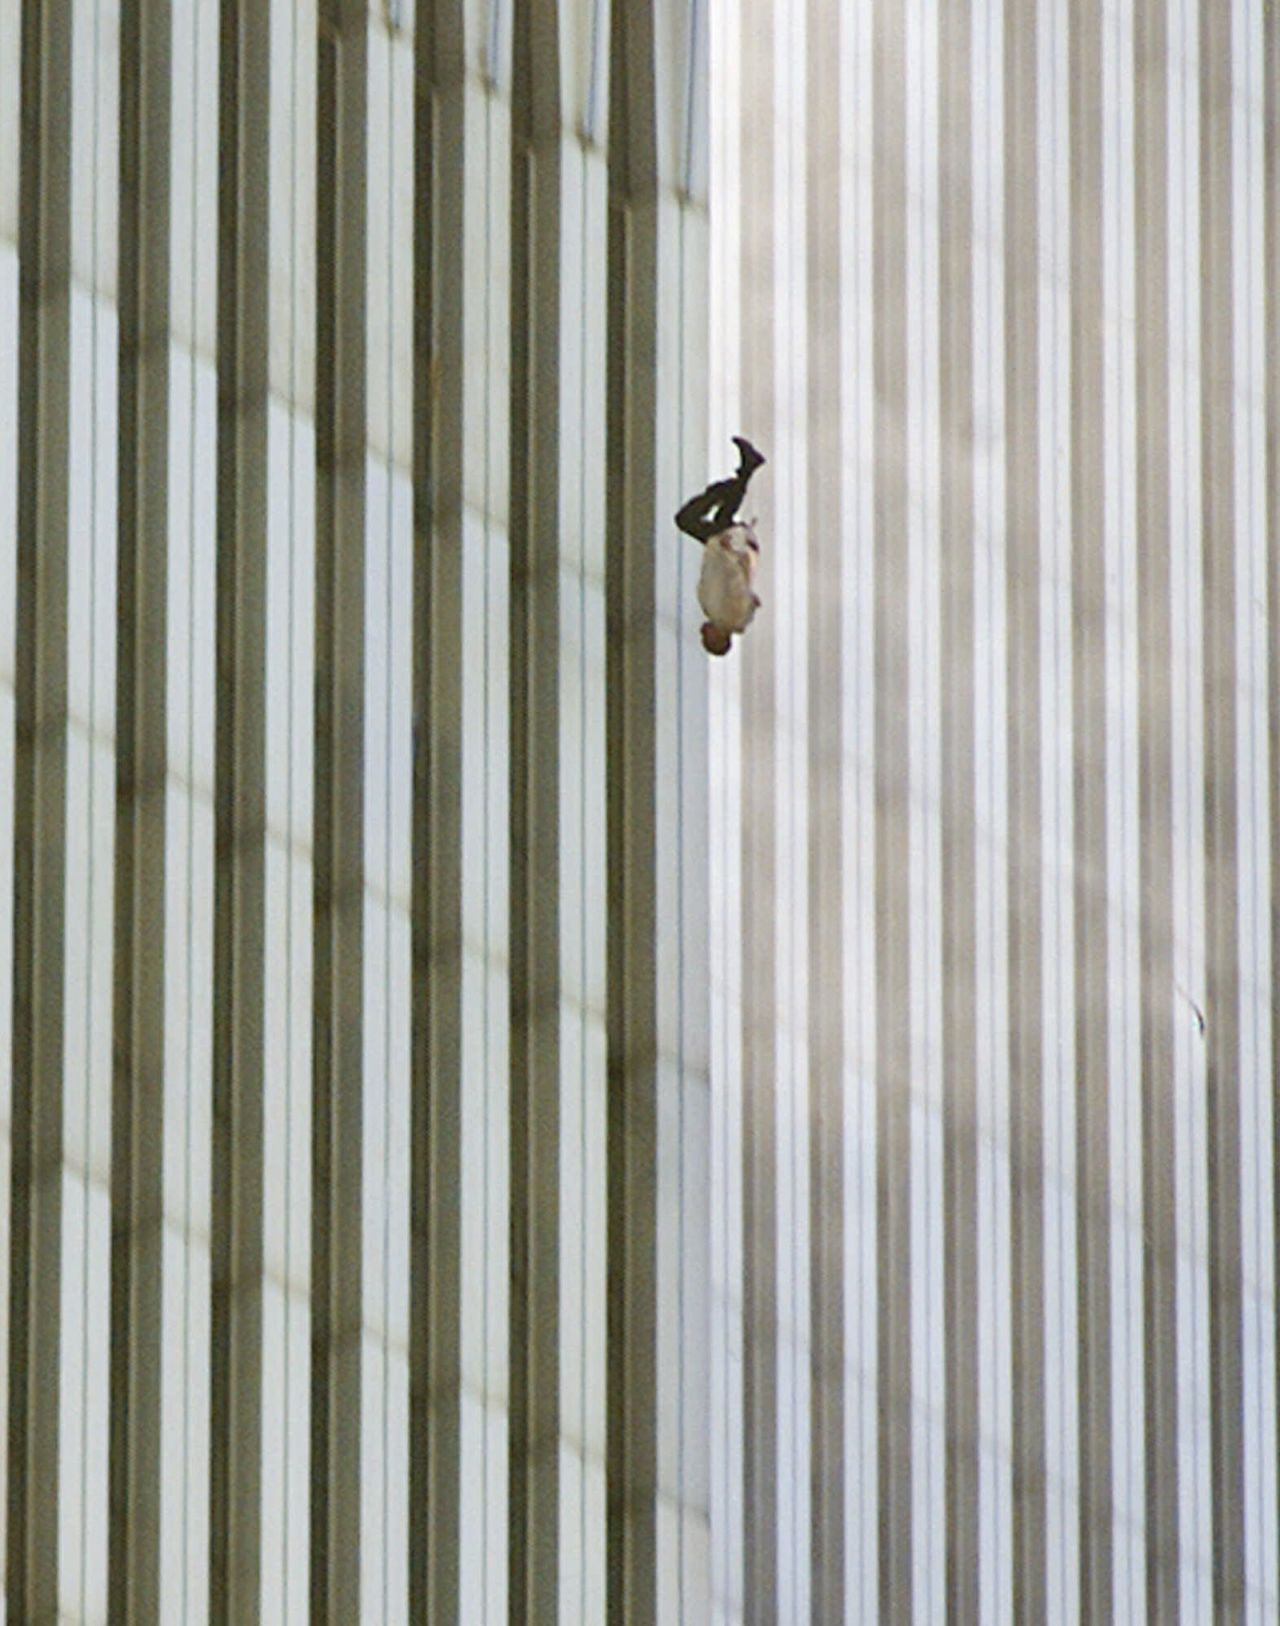 A man falls from one of the World Trade Center towers. The publication of this photo, taken by Richard Drew, led to a public outcry from people who found it insensitive. Drew sees it differently. <a href="http://www.thedailybeast.com/articles/2011/09/08/richard-drew-s-the-falling-man-ap-photographer-on-his-iconic-9-11-photo.html" target="_blank" target="_blank">On the 10th anniversary of the attacks,</a> he said he considers the falling man an "unknown soldier" who he hopes "represents everyone who had that same fate that day." It's believed that upwards of 200 people fell or jumped to their deaths after the planes hit the towers.